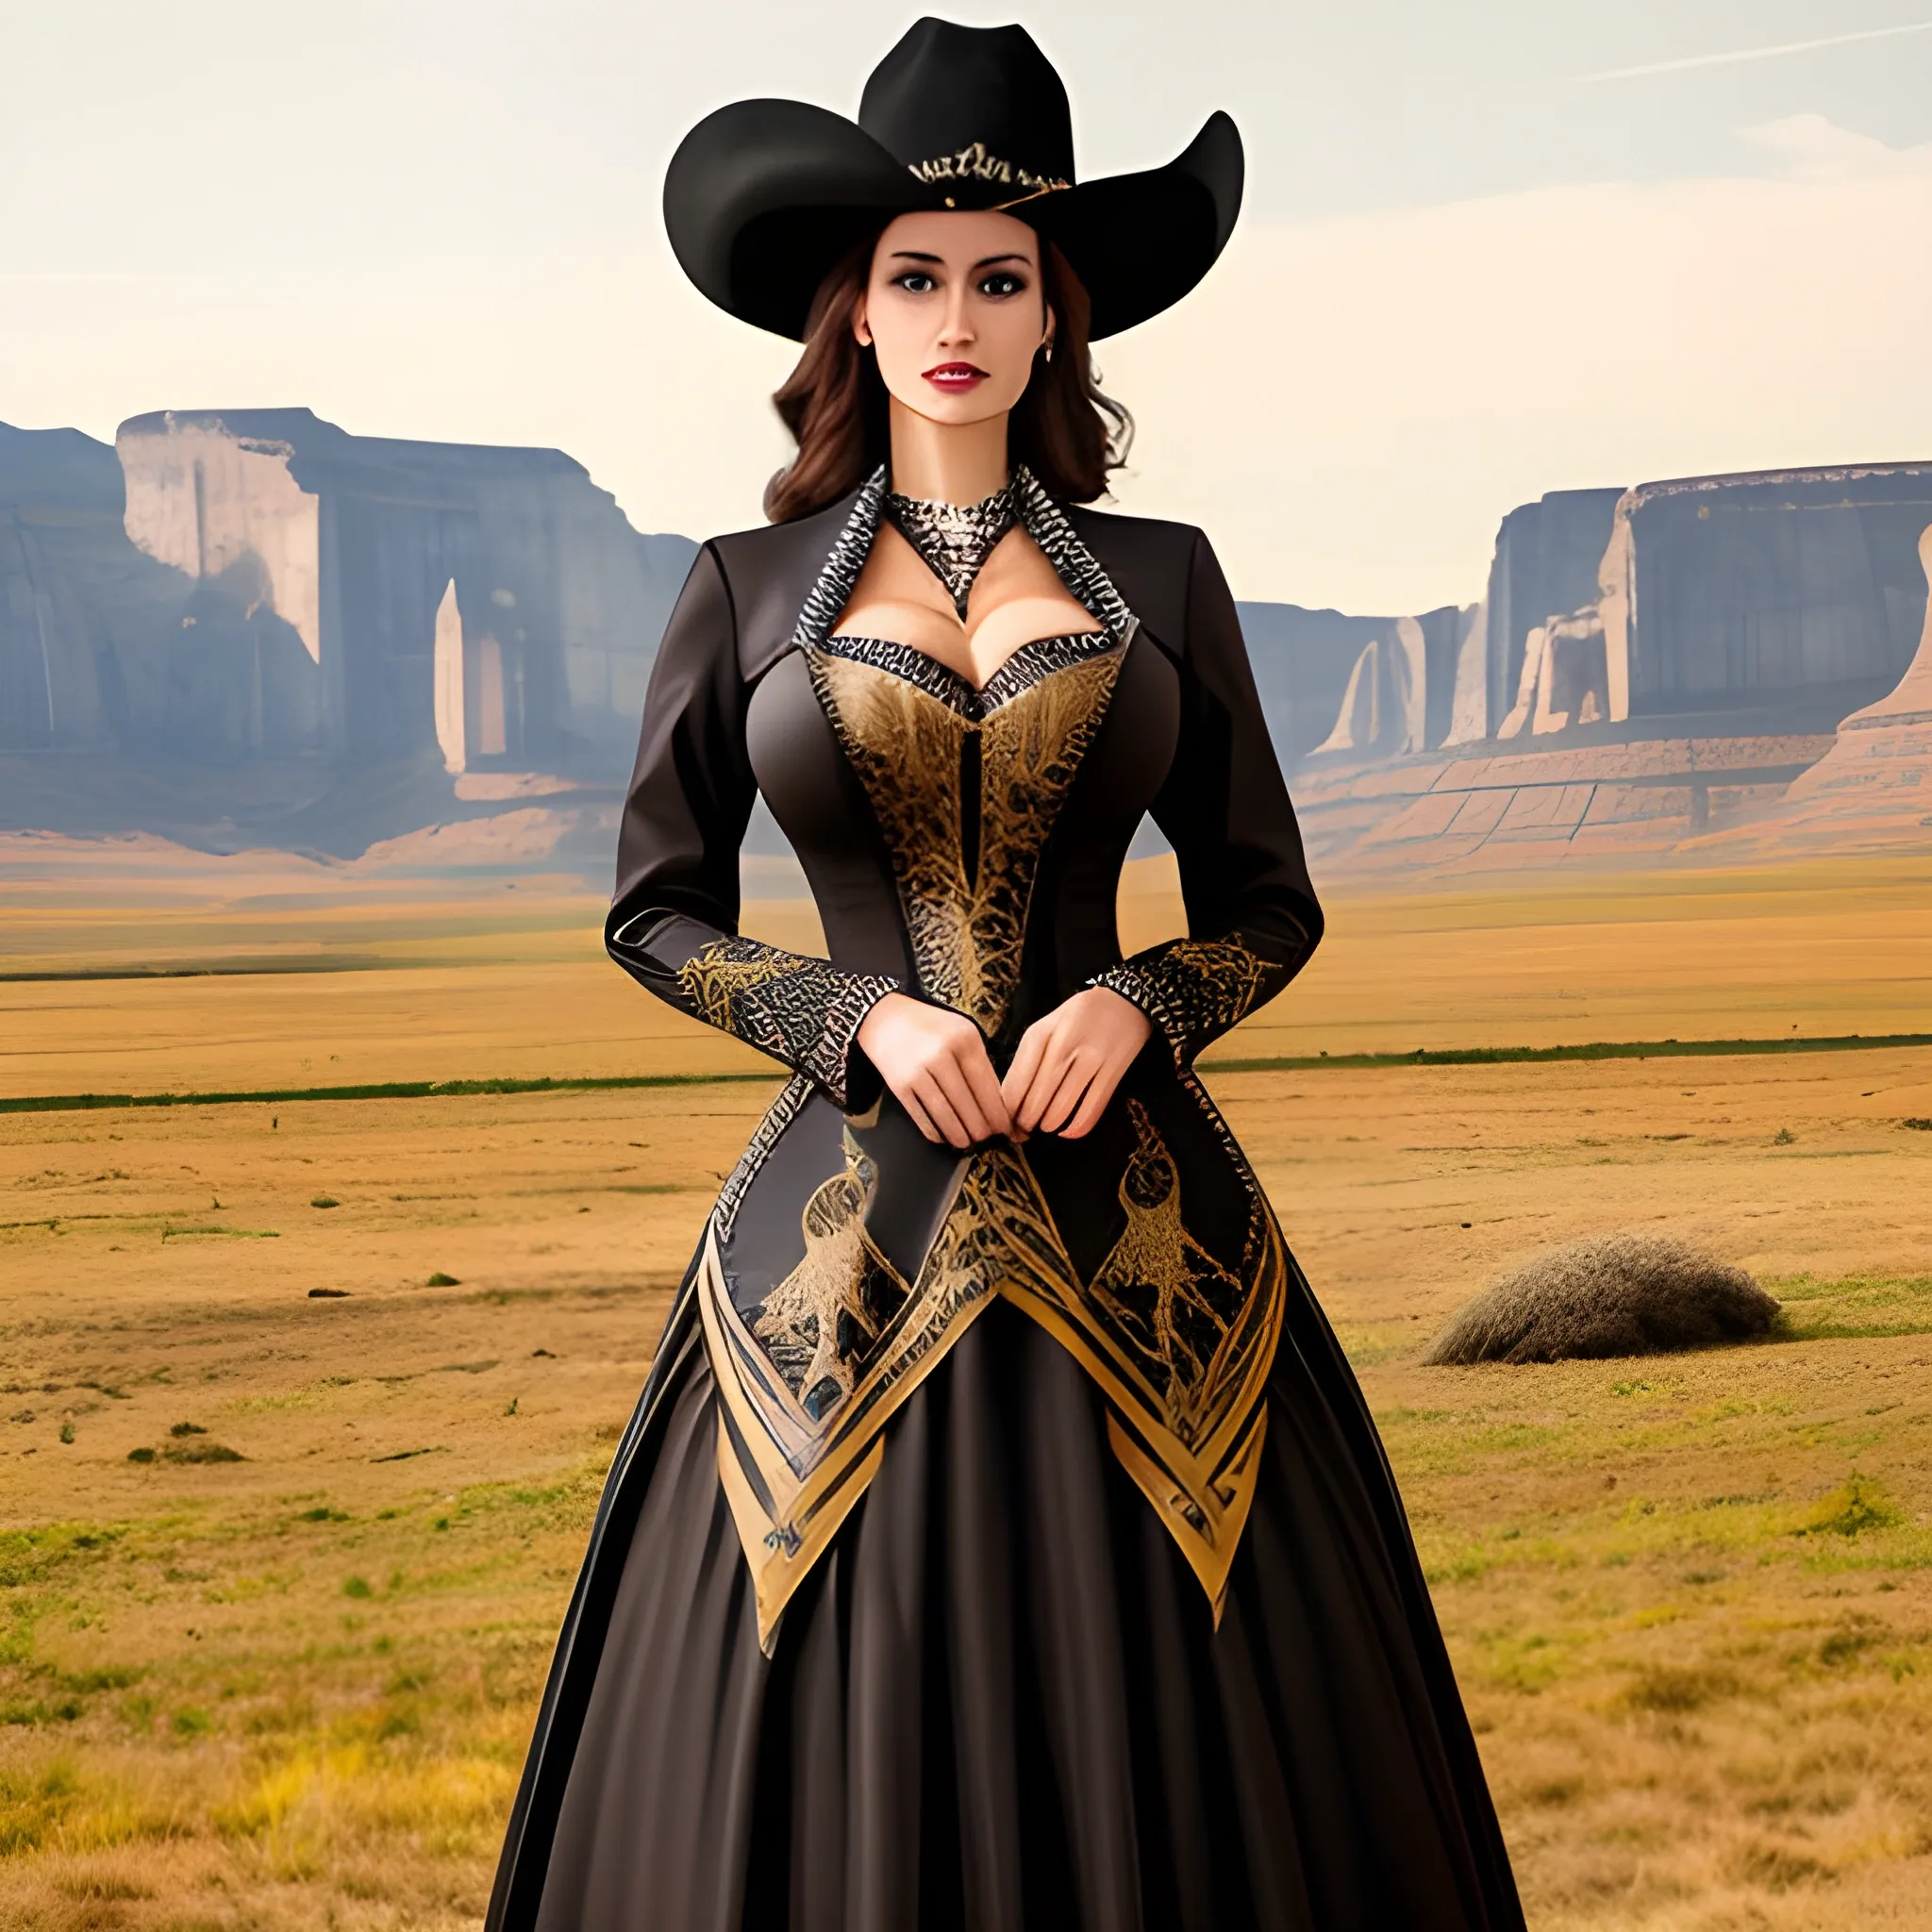 Glamorous and Gorgeous Party Wear Western Gowns That You Can Rock as a  Cocktail Dress